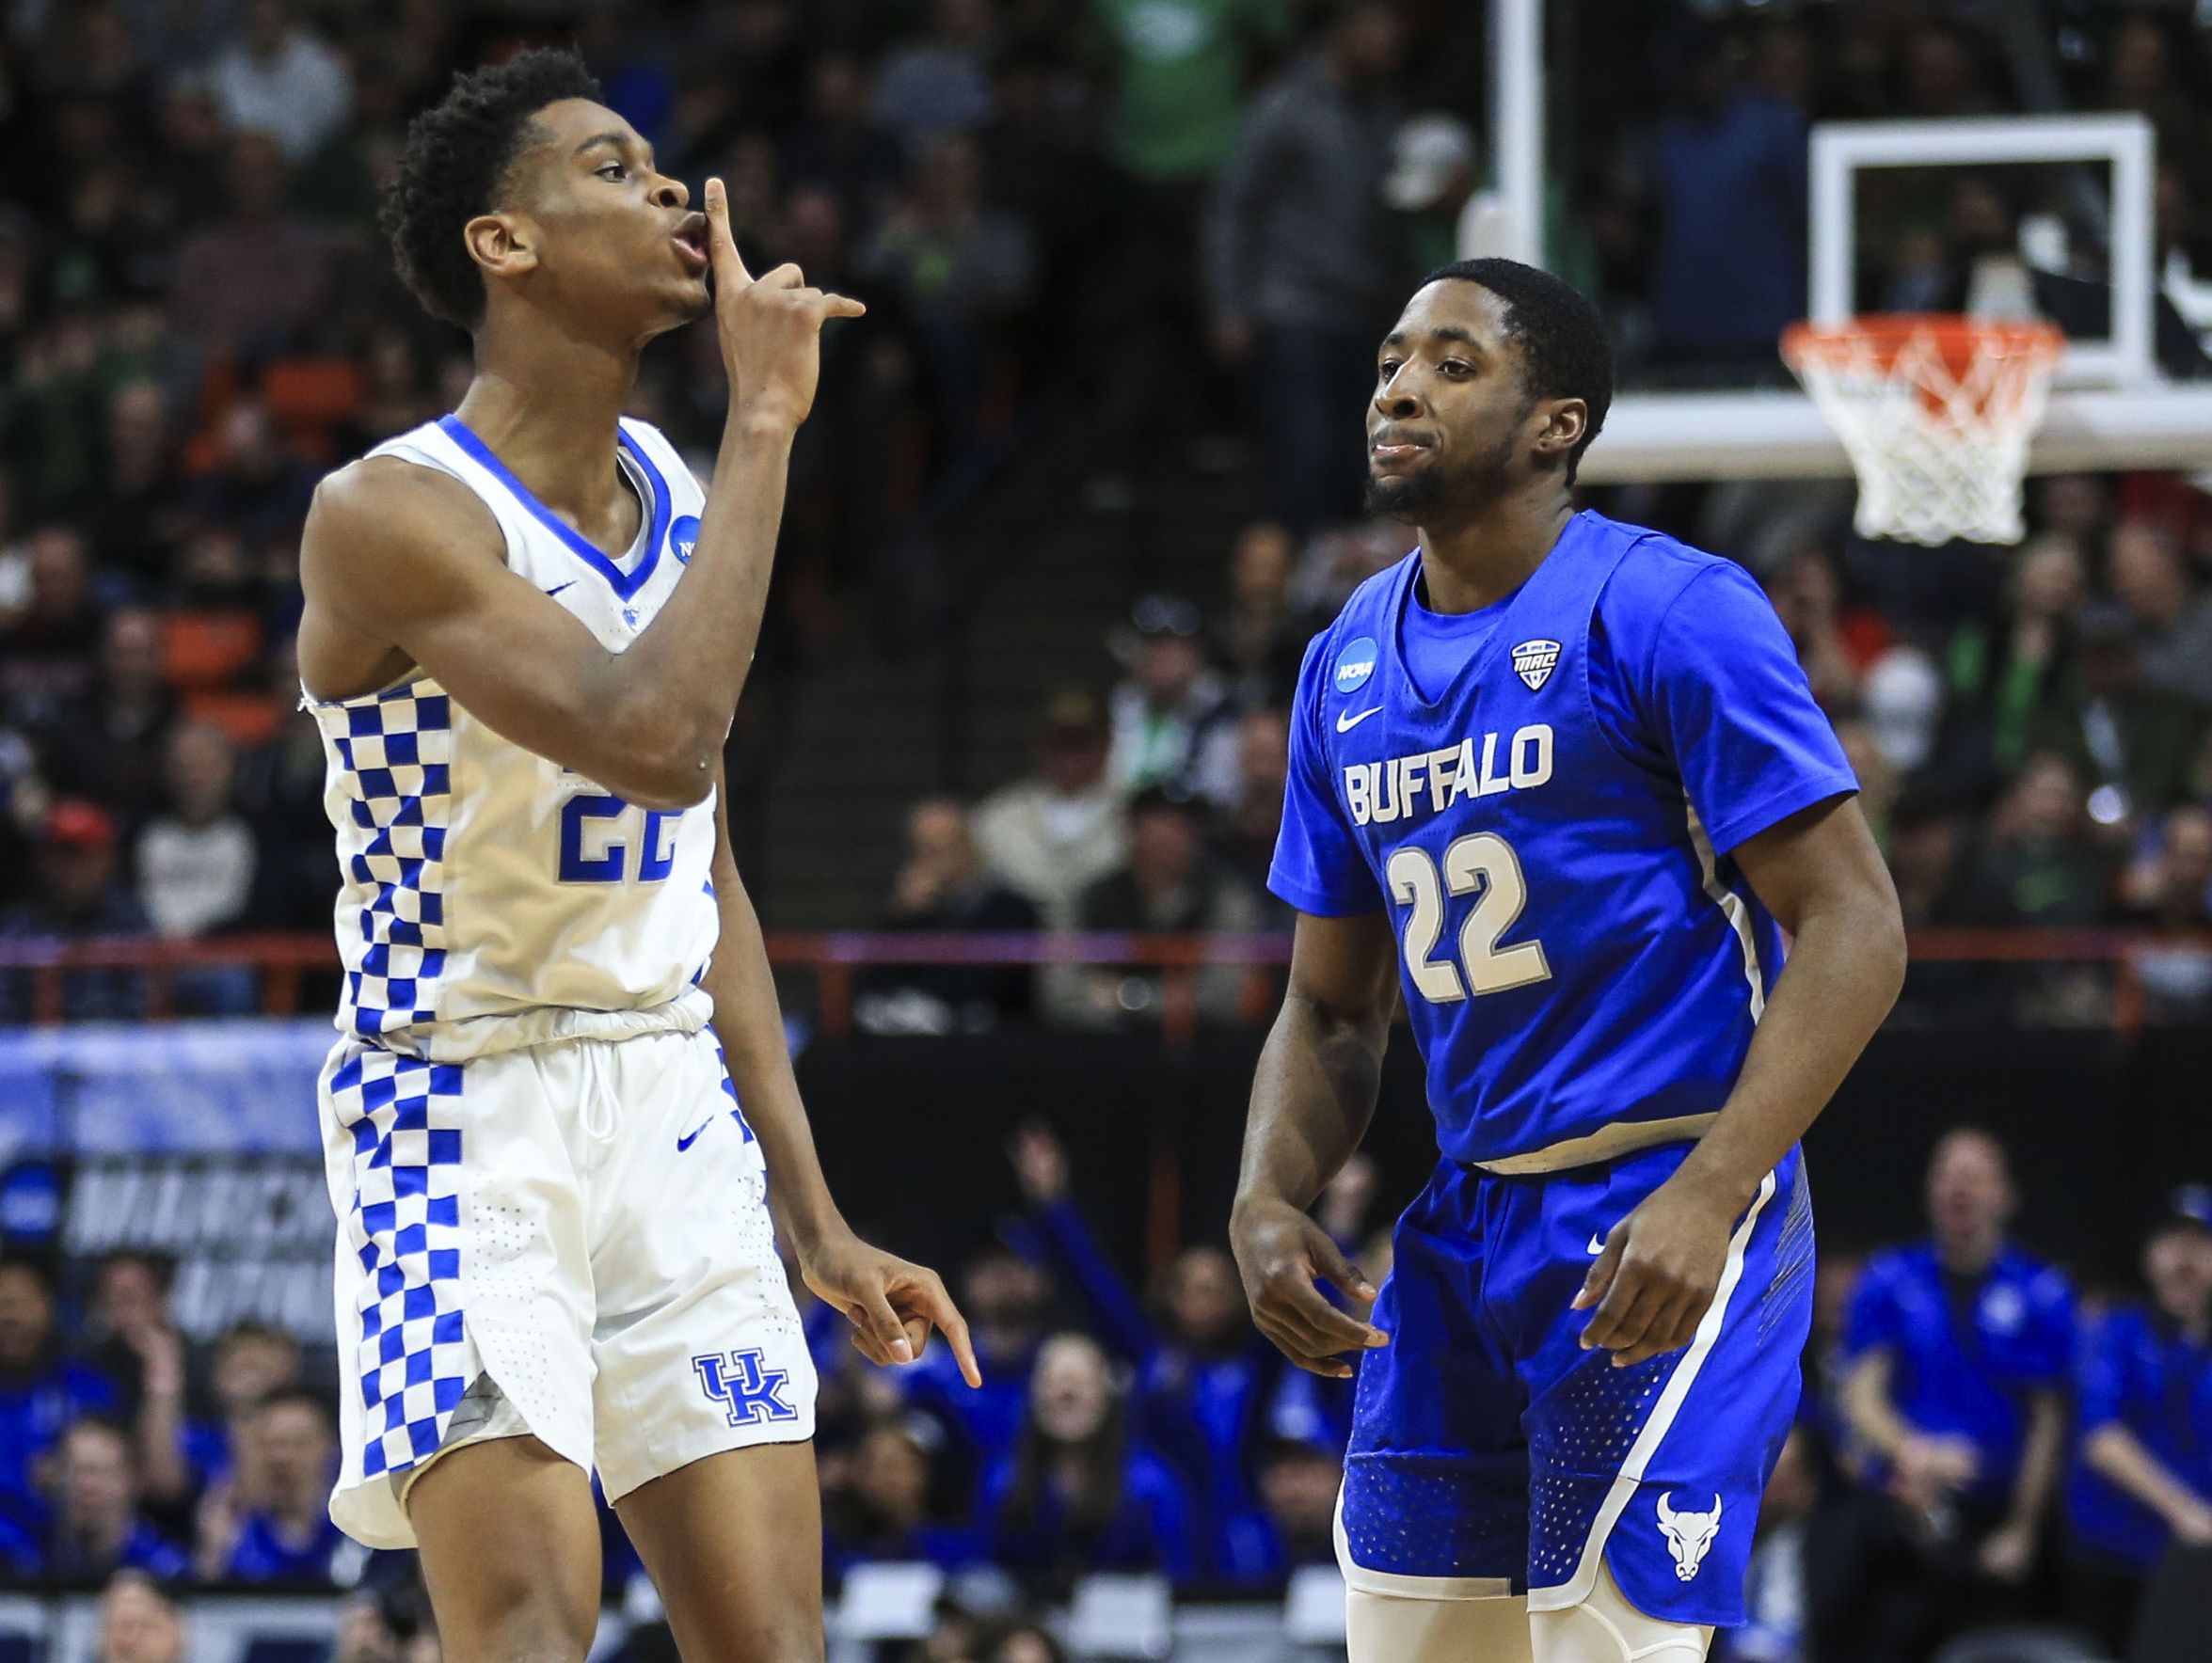 Shai Gilgeous-Alexander made the plays and gesture UK basketball needed